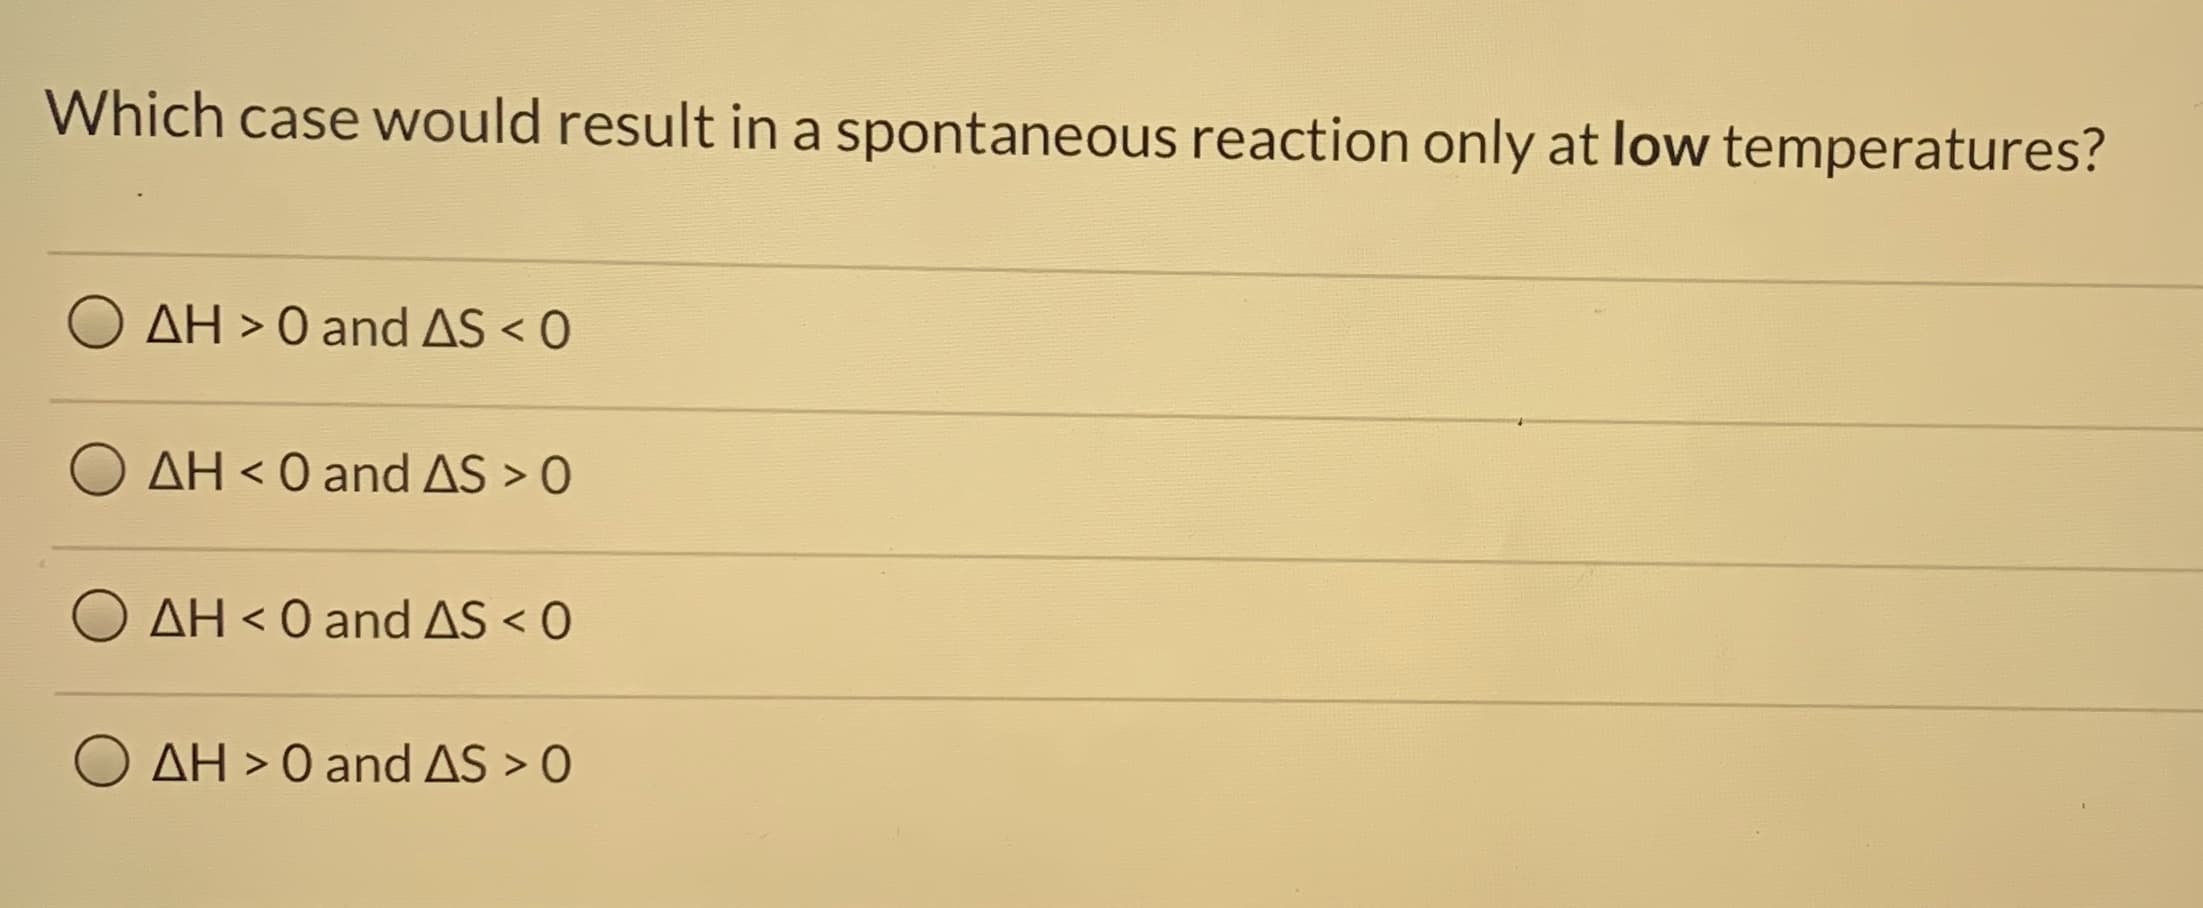 Which case would result in a spontaneous reaction only at low temperatures?
AH > 0 and AS < 0
AH < 0 and AS > O
AH < 0 andAS < O
O AH > 0 and AS > 0
